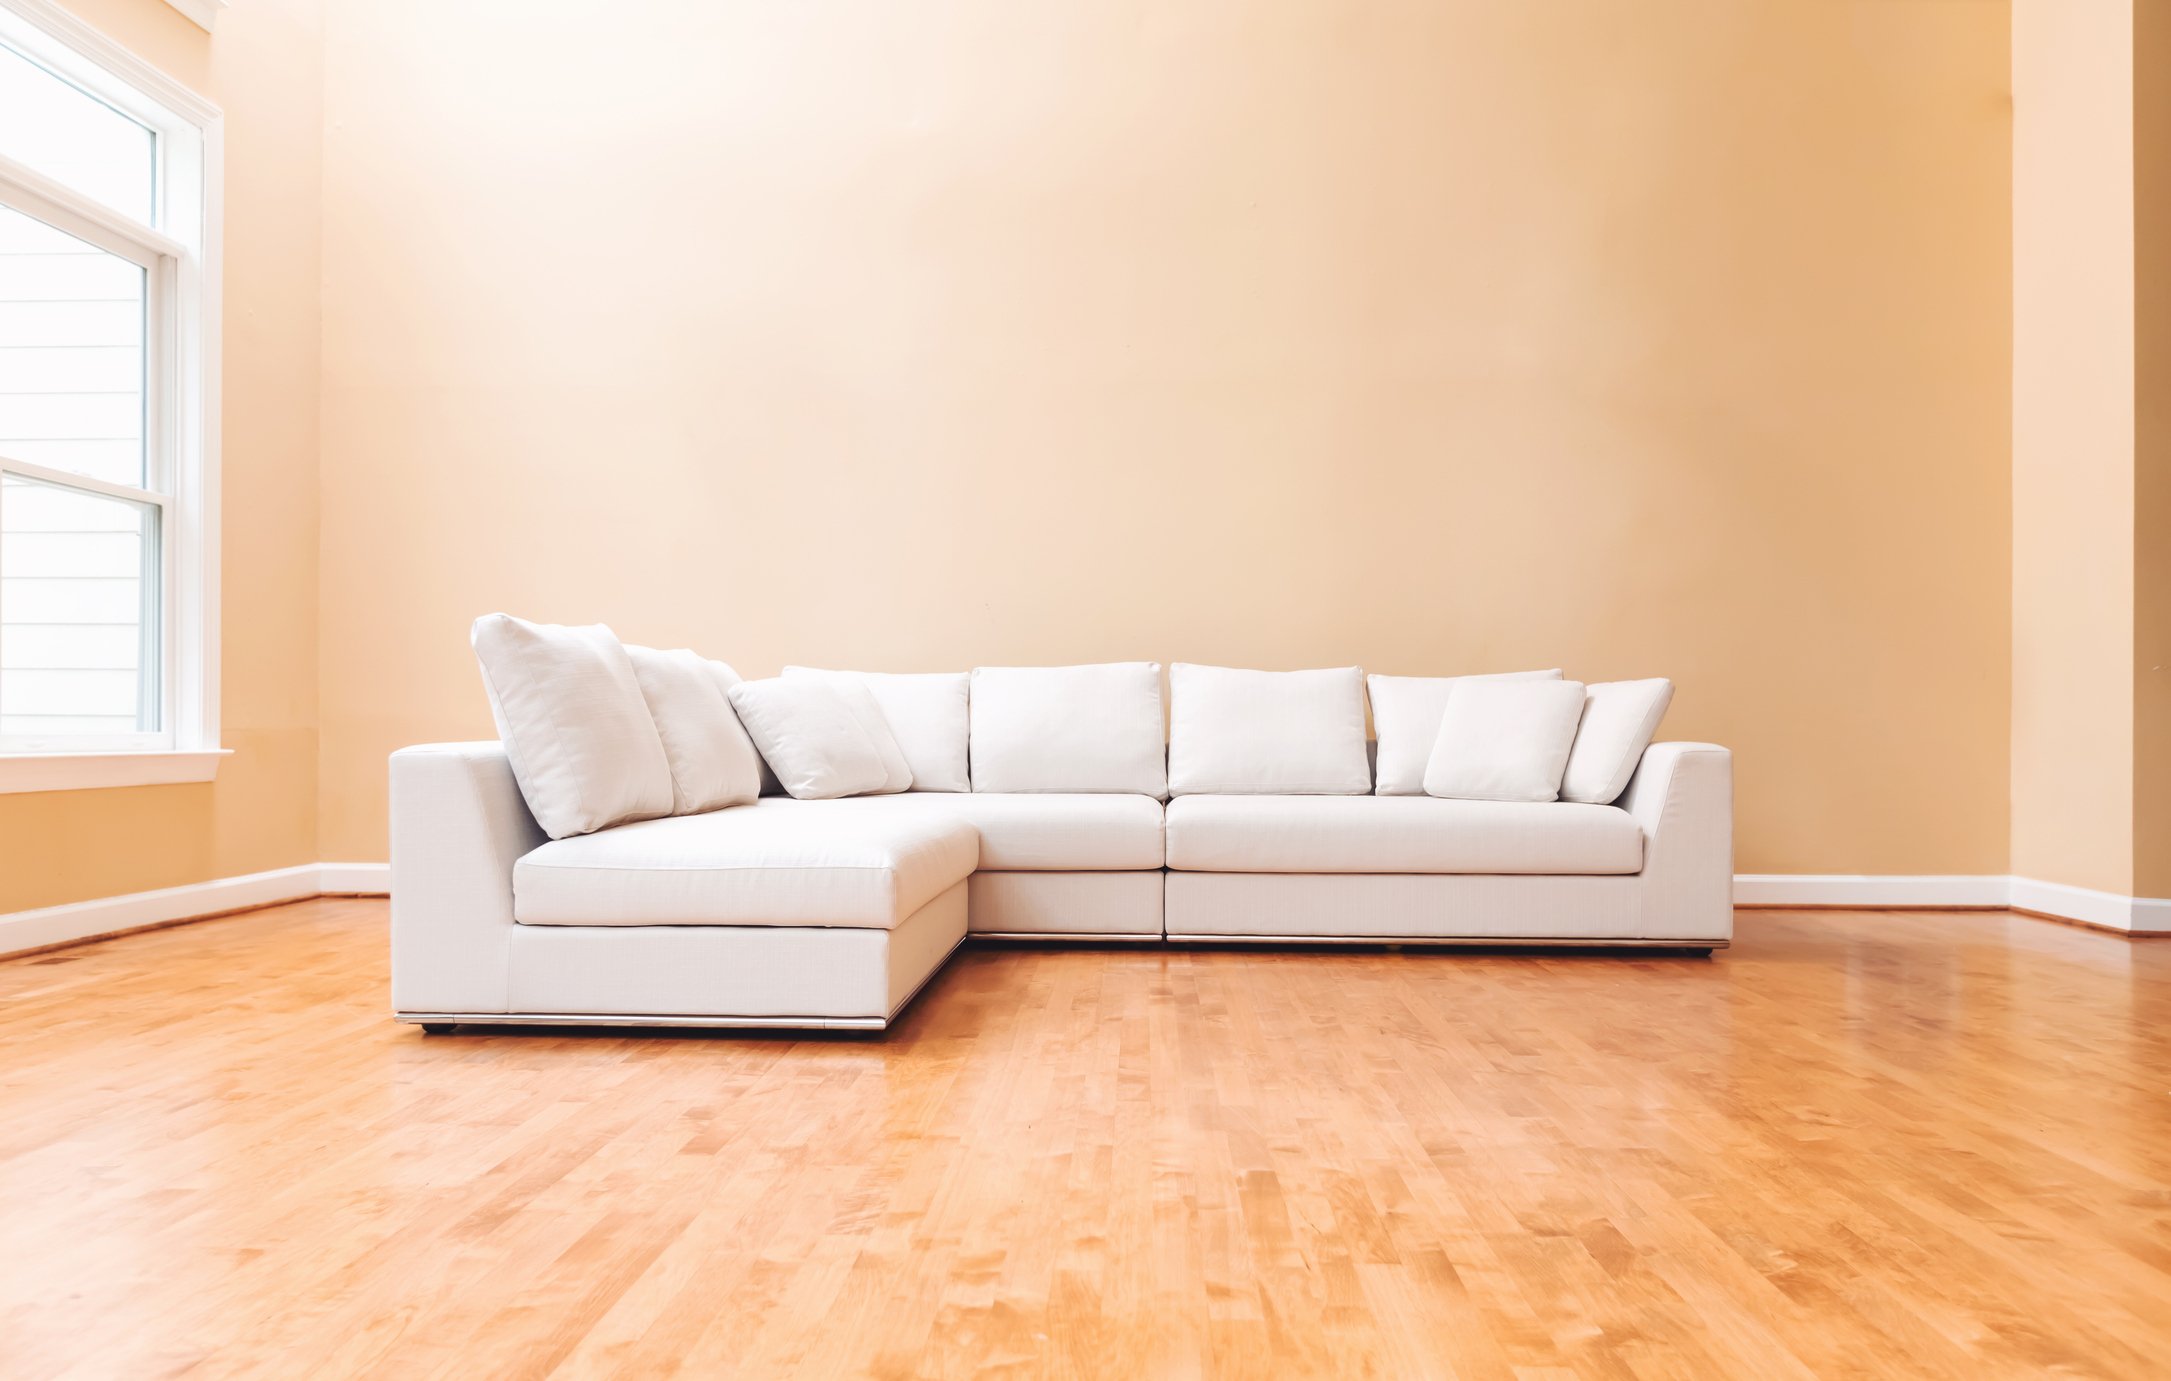 A sectional couch